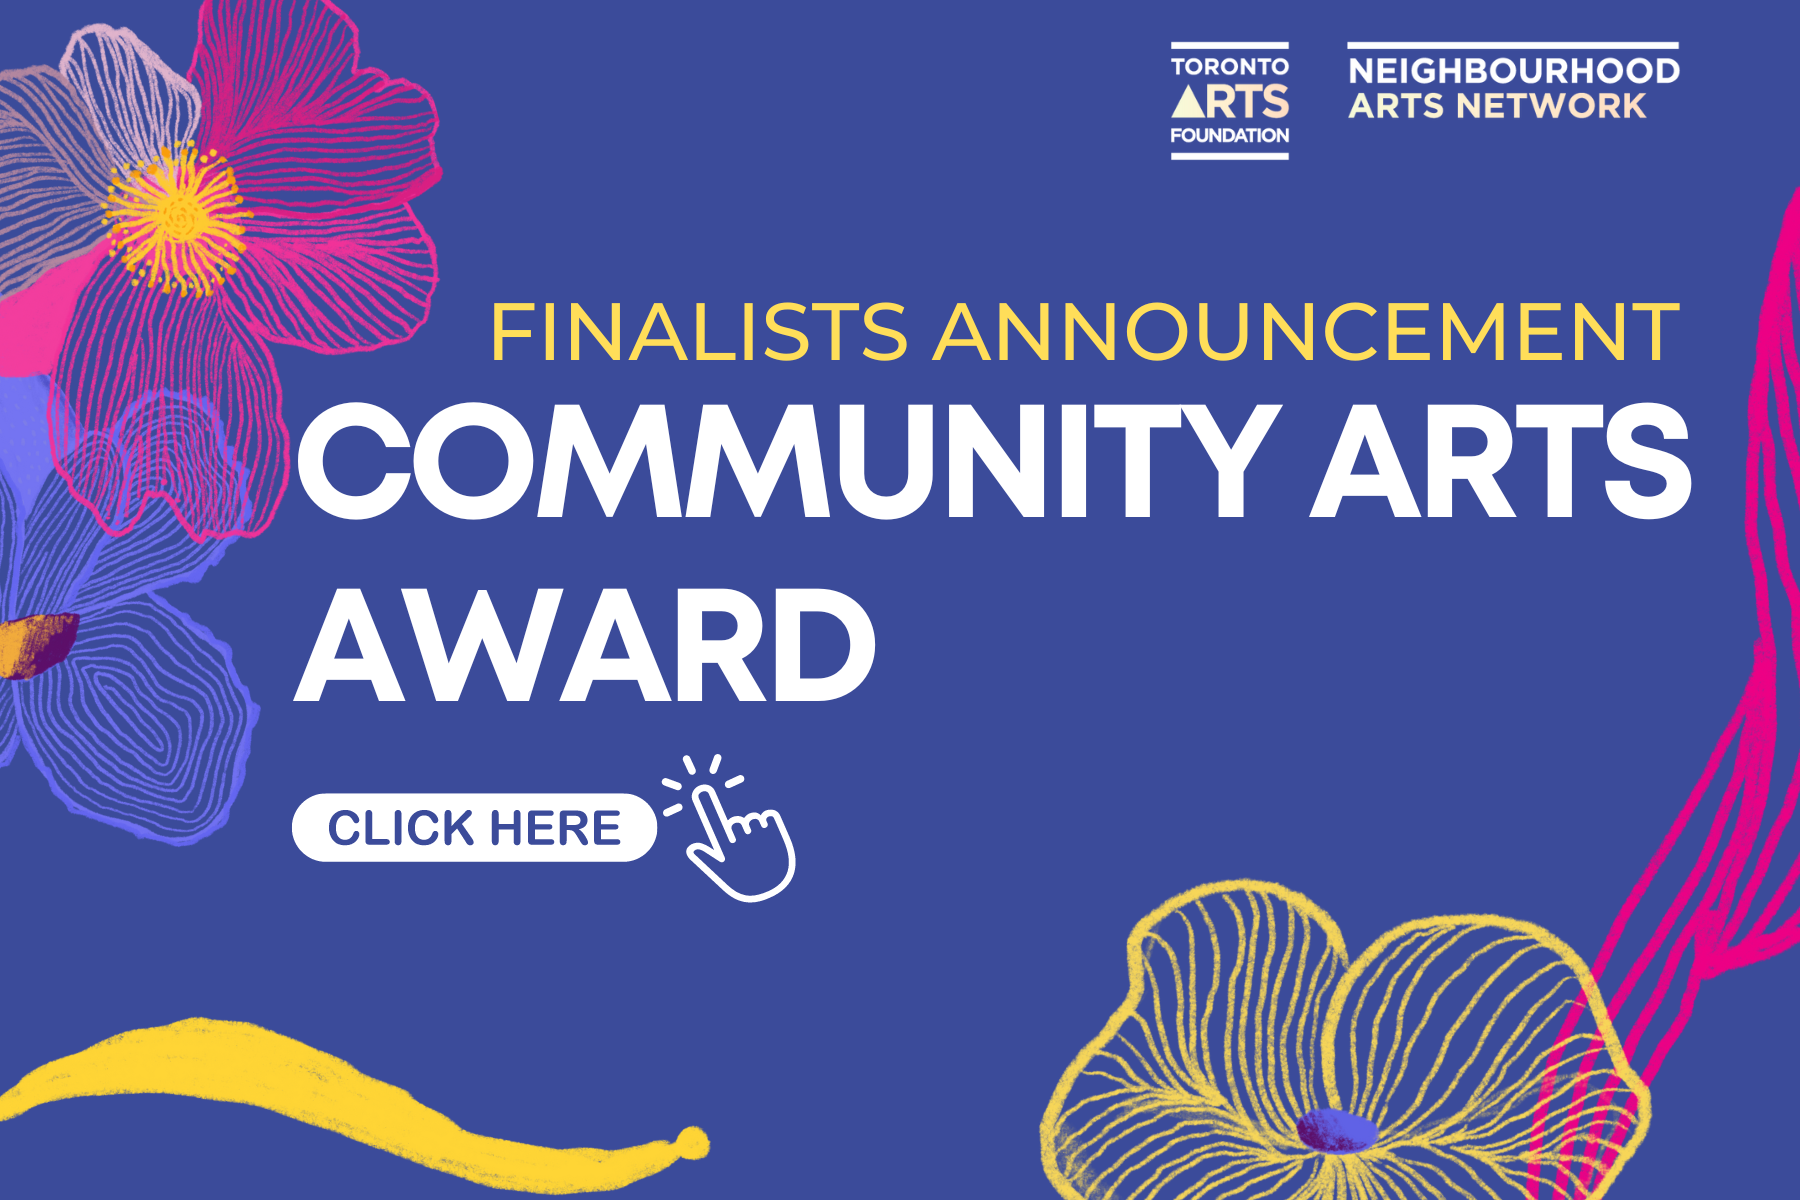 The image has a blue background with decorative flowers and lines on the edges. The text on the image reads, “Finalists Announcement" in yellow and "Community Arts Award" title in white. A 'click here